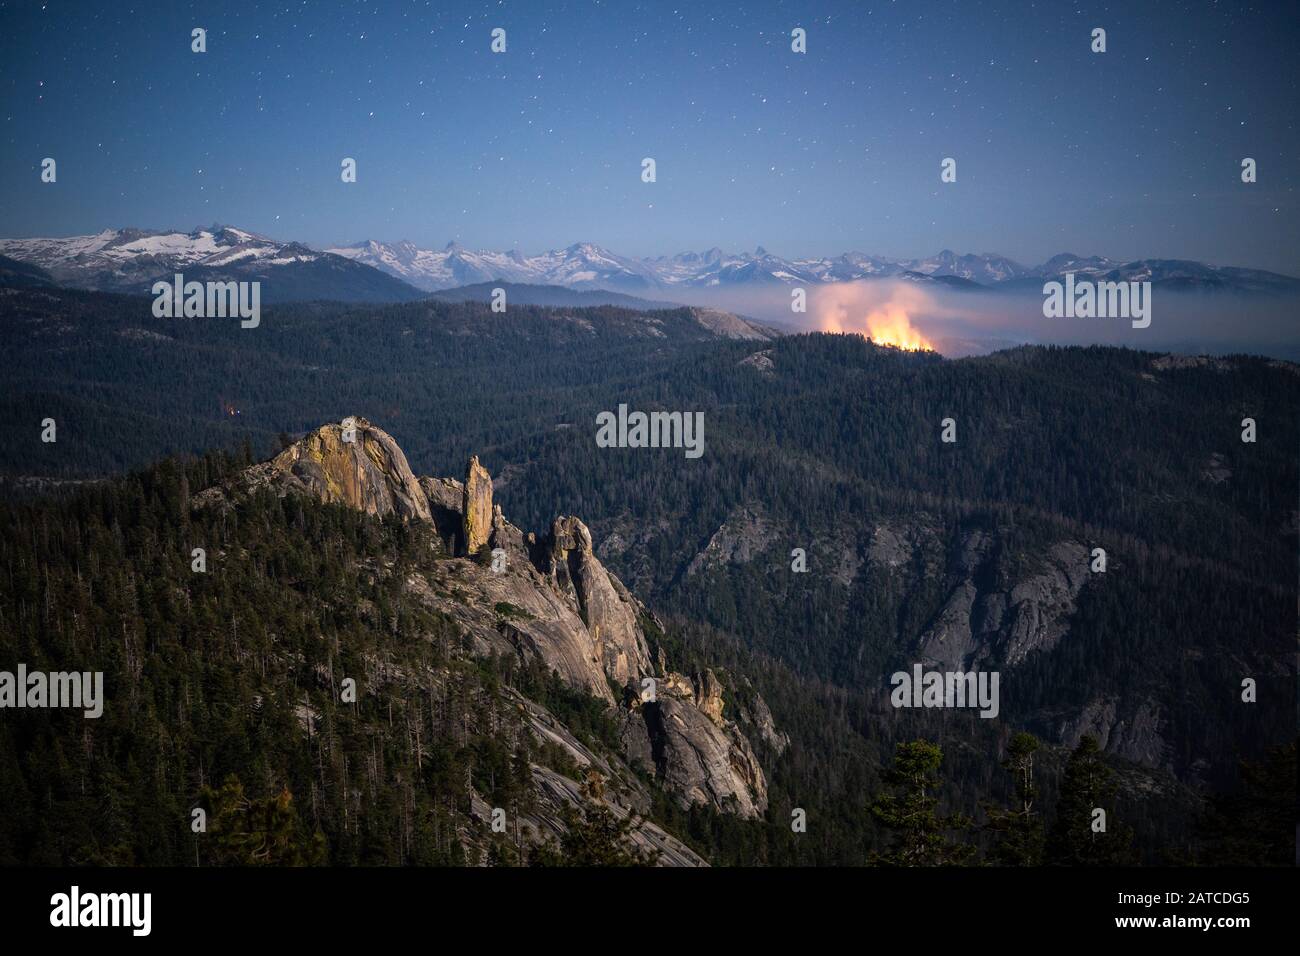 Controlled forest fire Burning behind Chimney rock, Sequoia National Park, California, USA Stock Photo